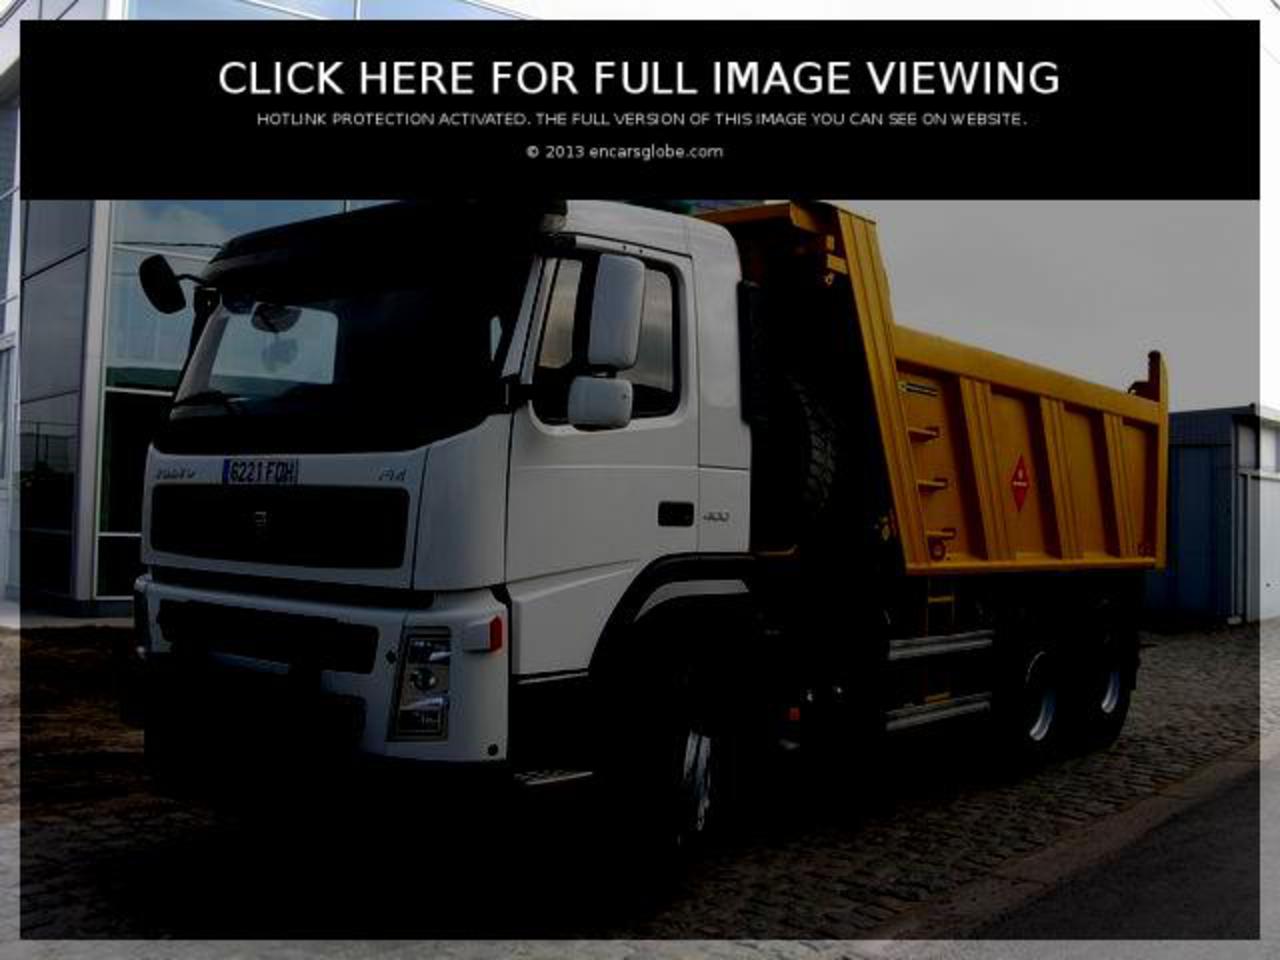 Volvo FM-400 8X2 Photo Gallery: Photo #10 out of 10, Image Size ...